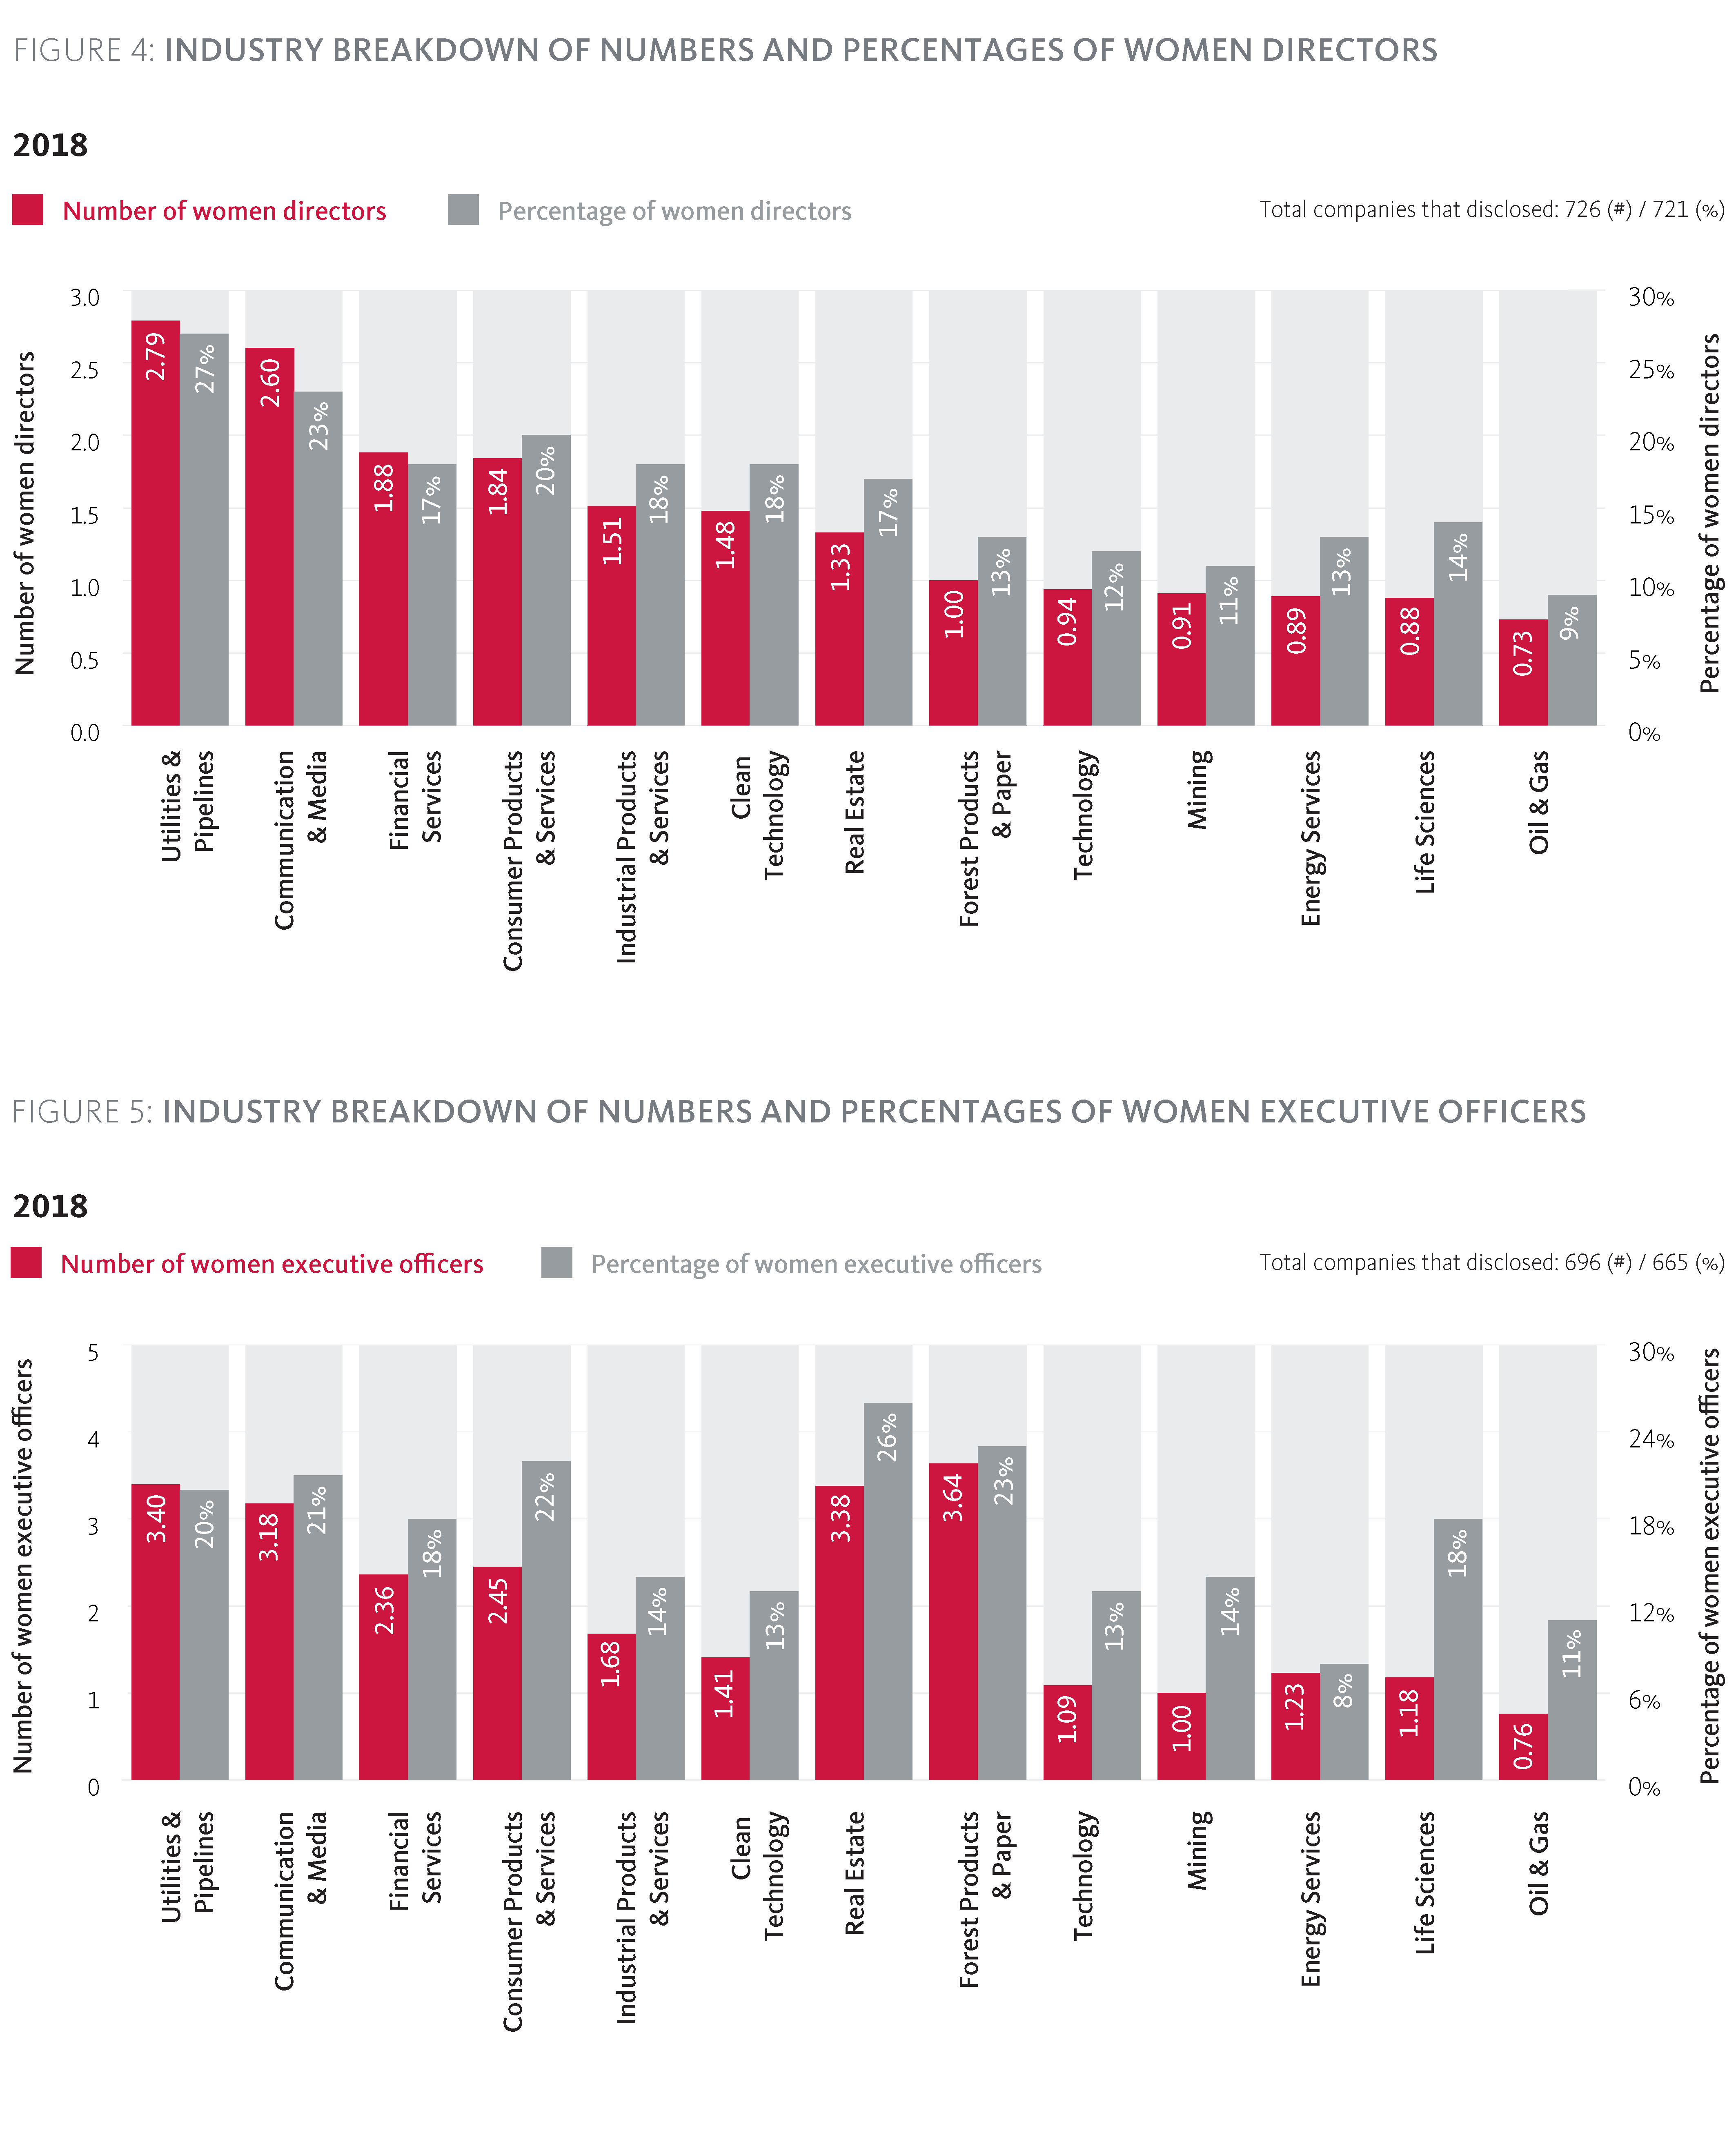 Industry breakdown of numbers and percentages of women directors and executive officers